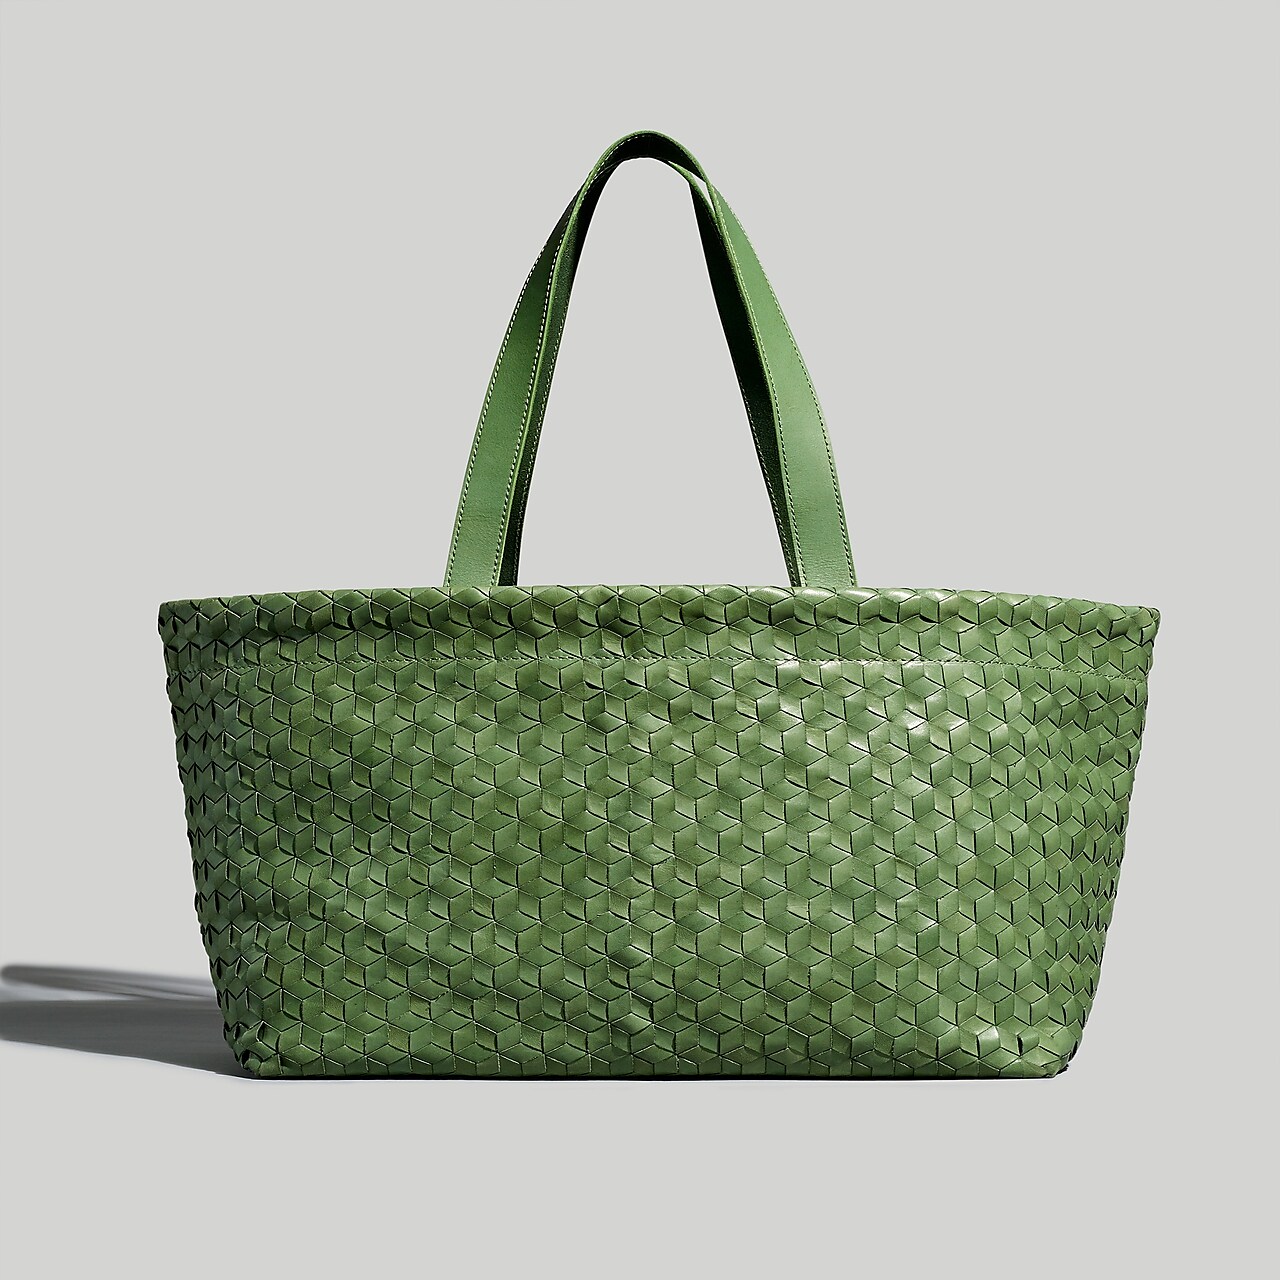 Mw Large Woven Leather Tote In Green